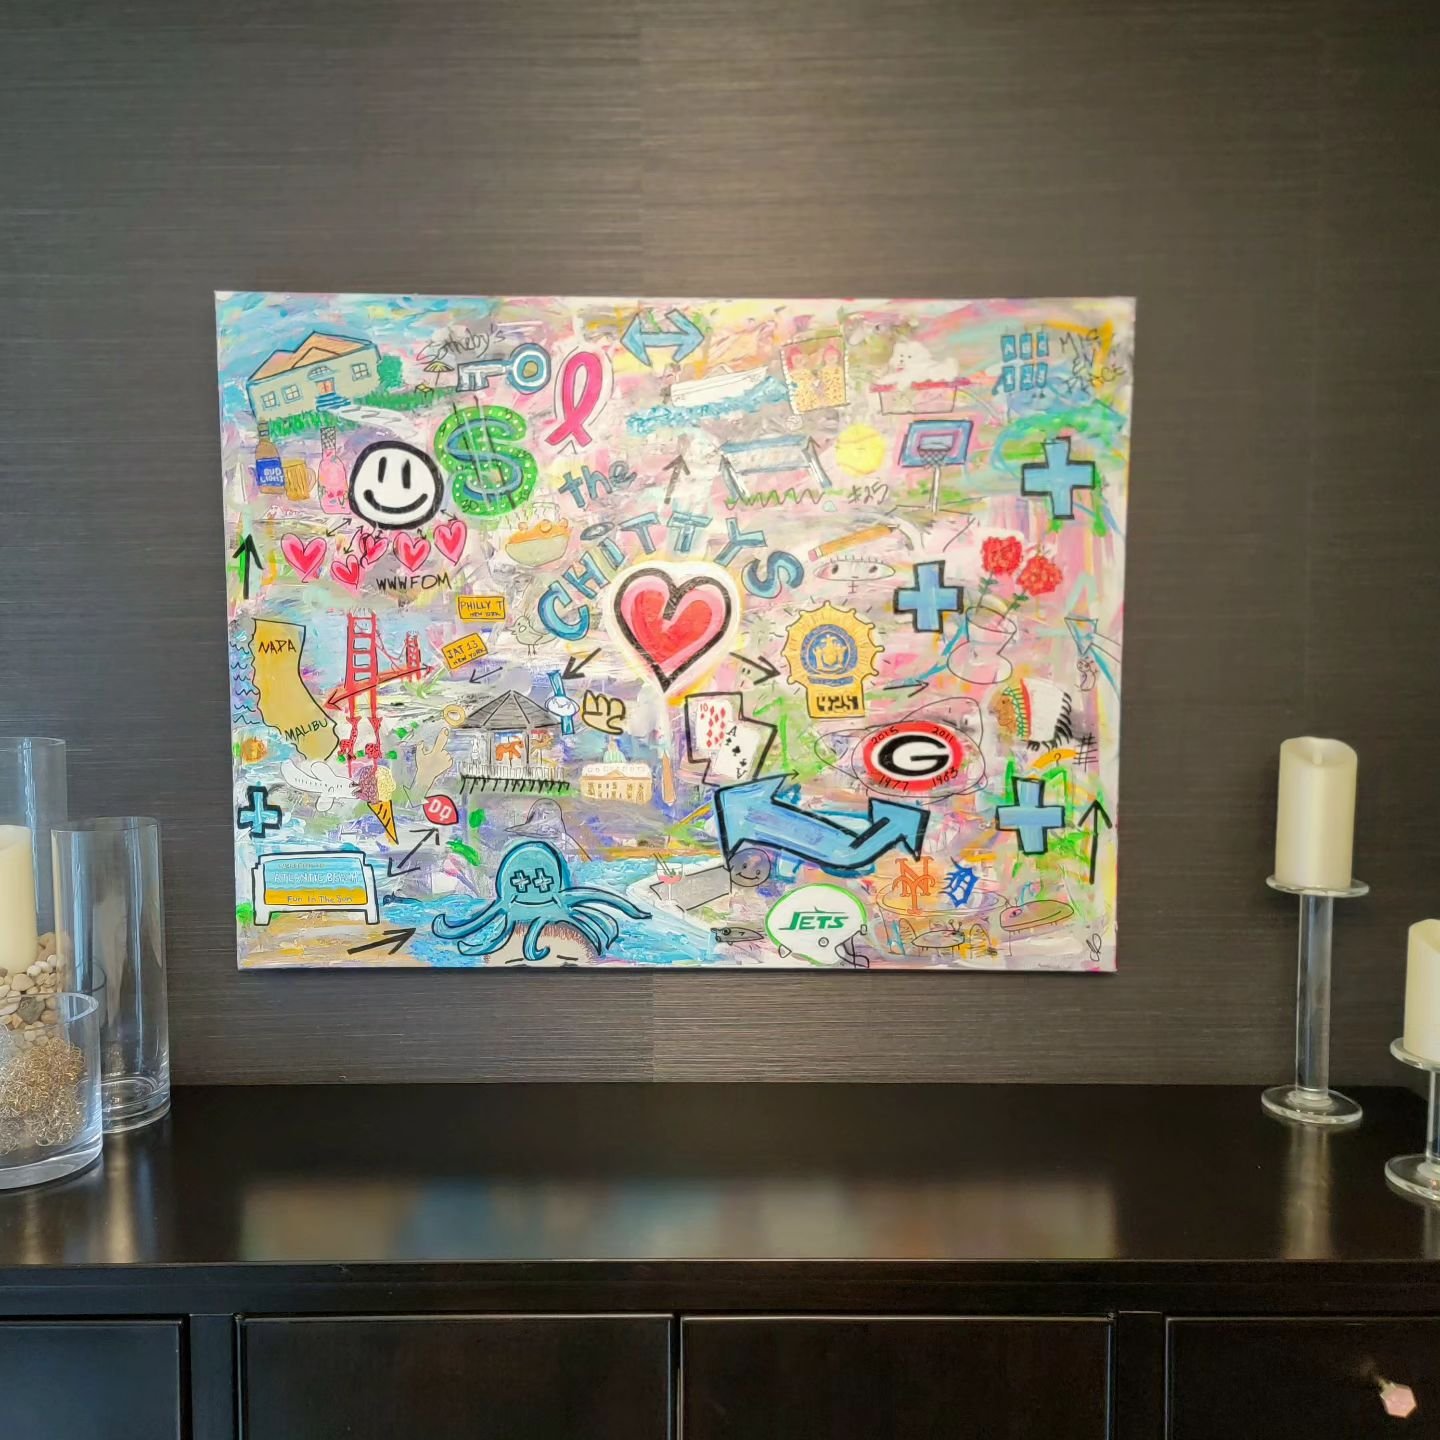 Just installed this 36 x 48 commissioned piece today in such a lovely home.  It was already decorated so well in shades of white and grey.  Now, they also have a huge POP of color.

Let.me.know when you're ready for your own Your Life Commissioned wo